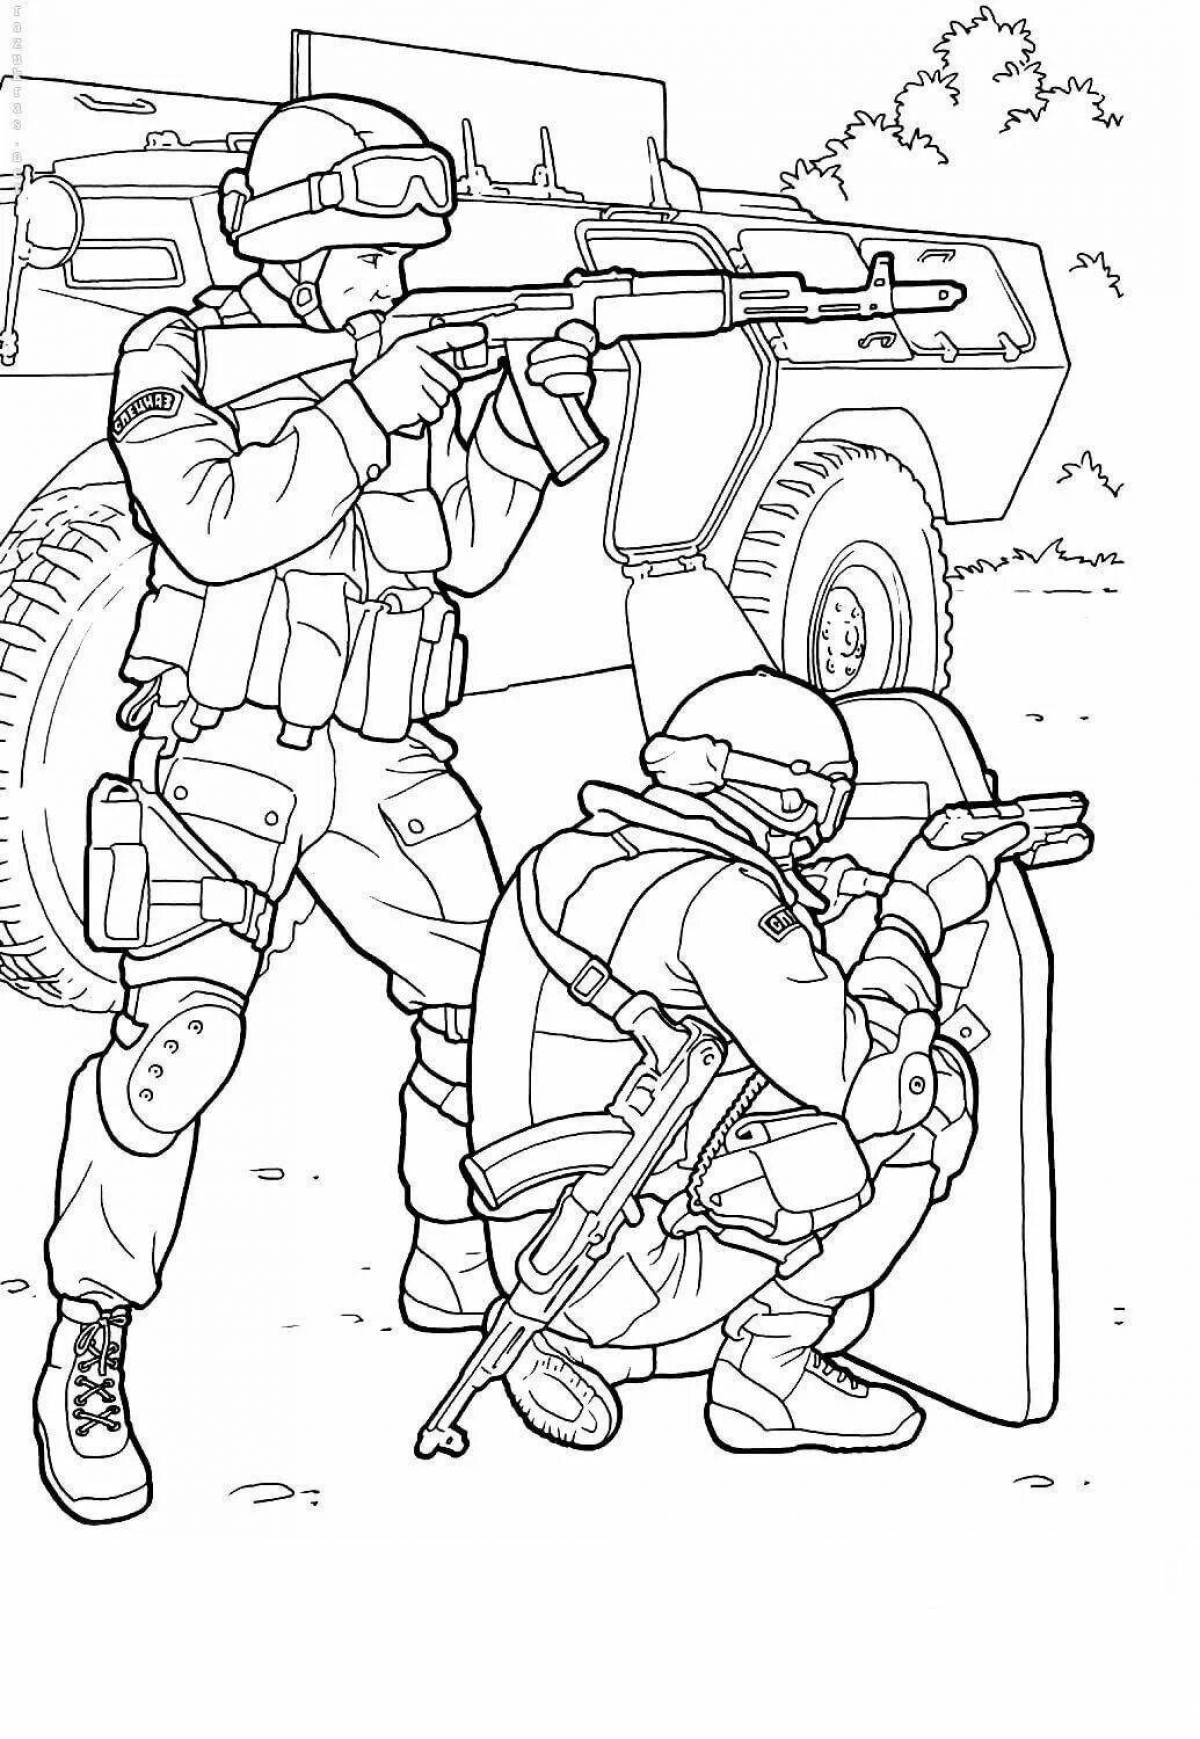 Coloring book heroic Russian soldier